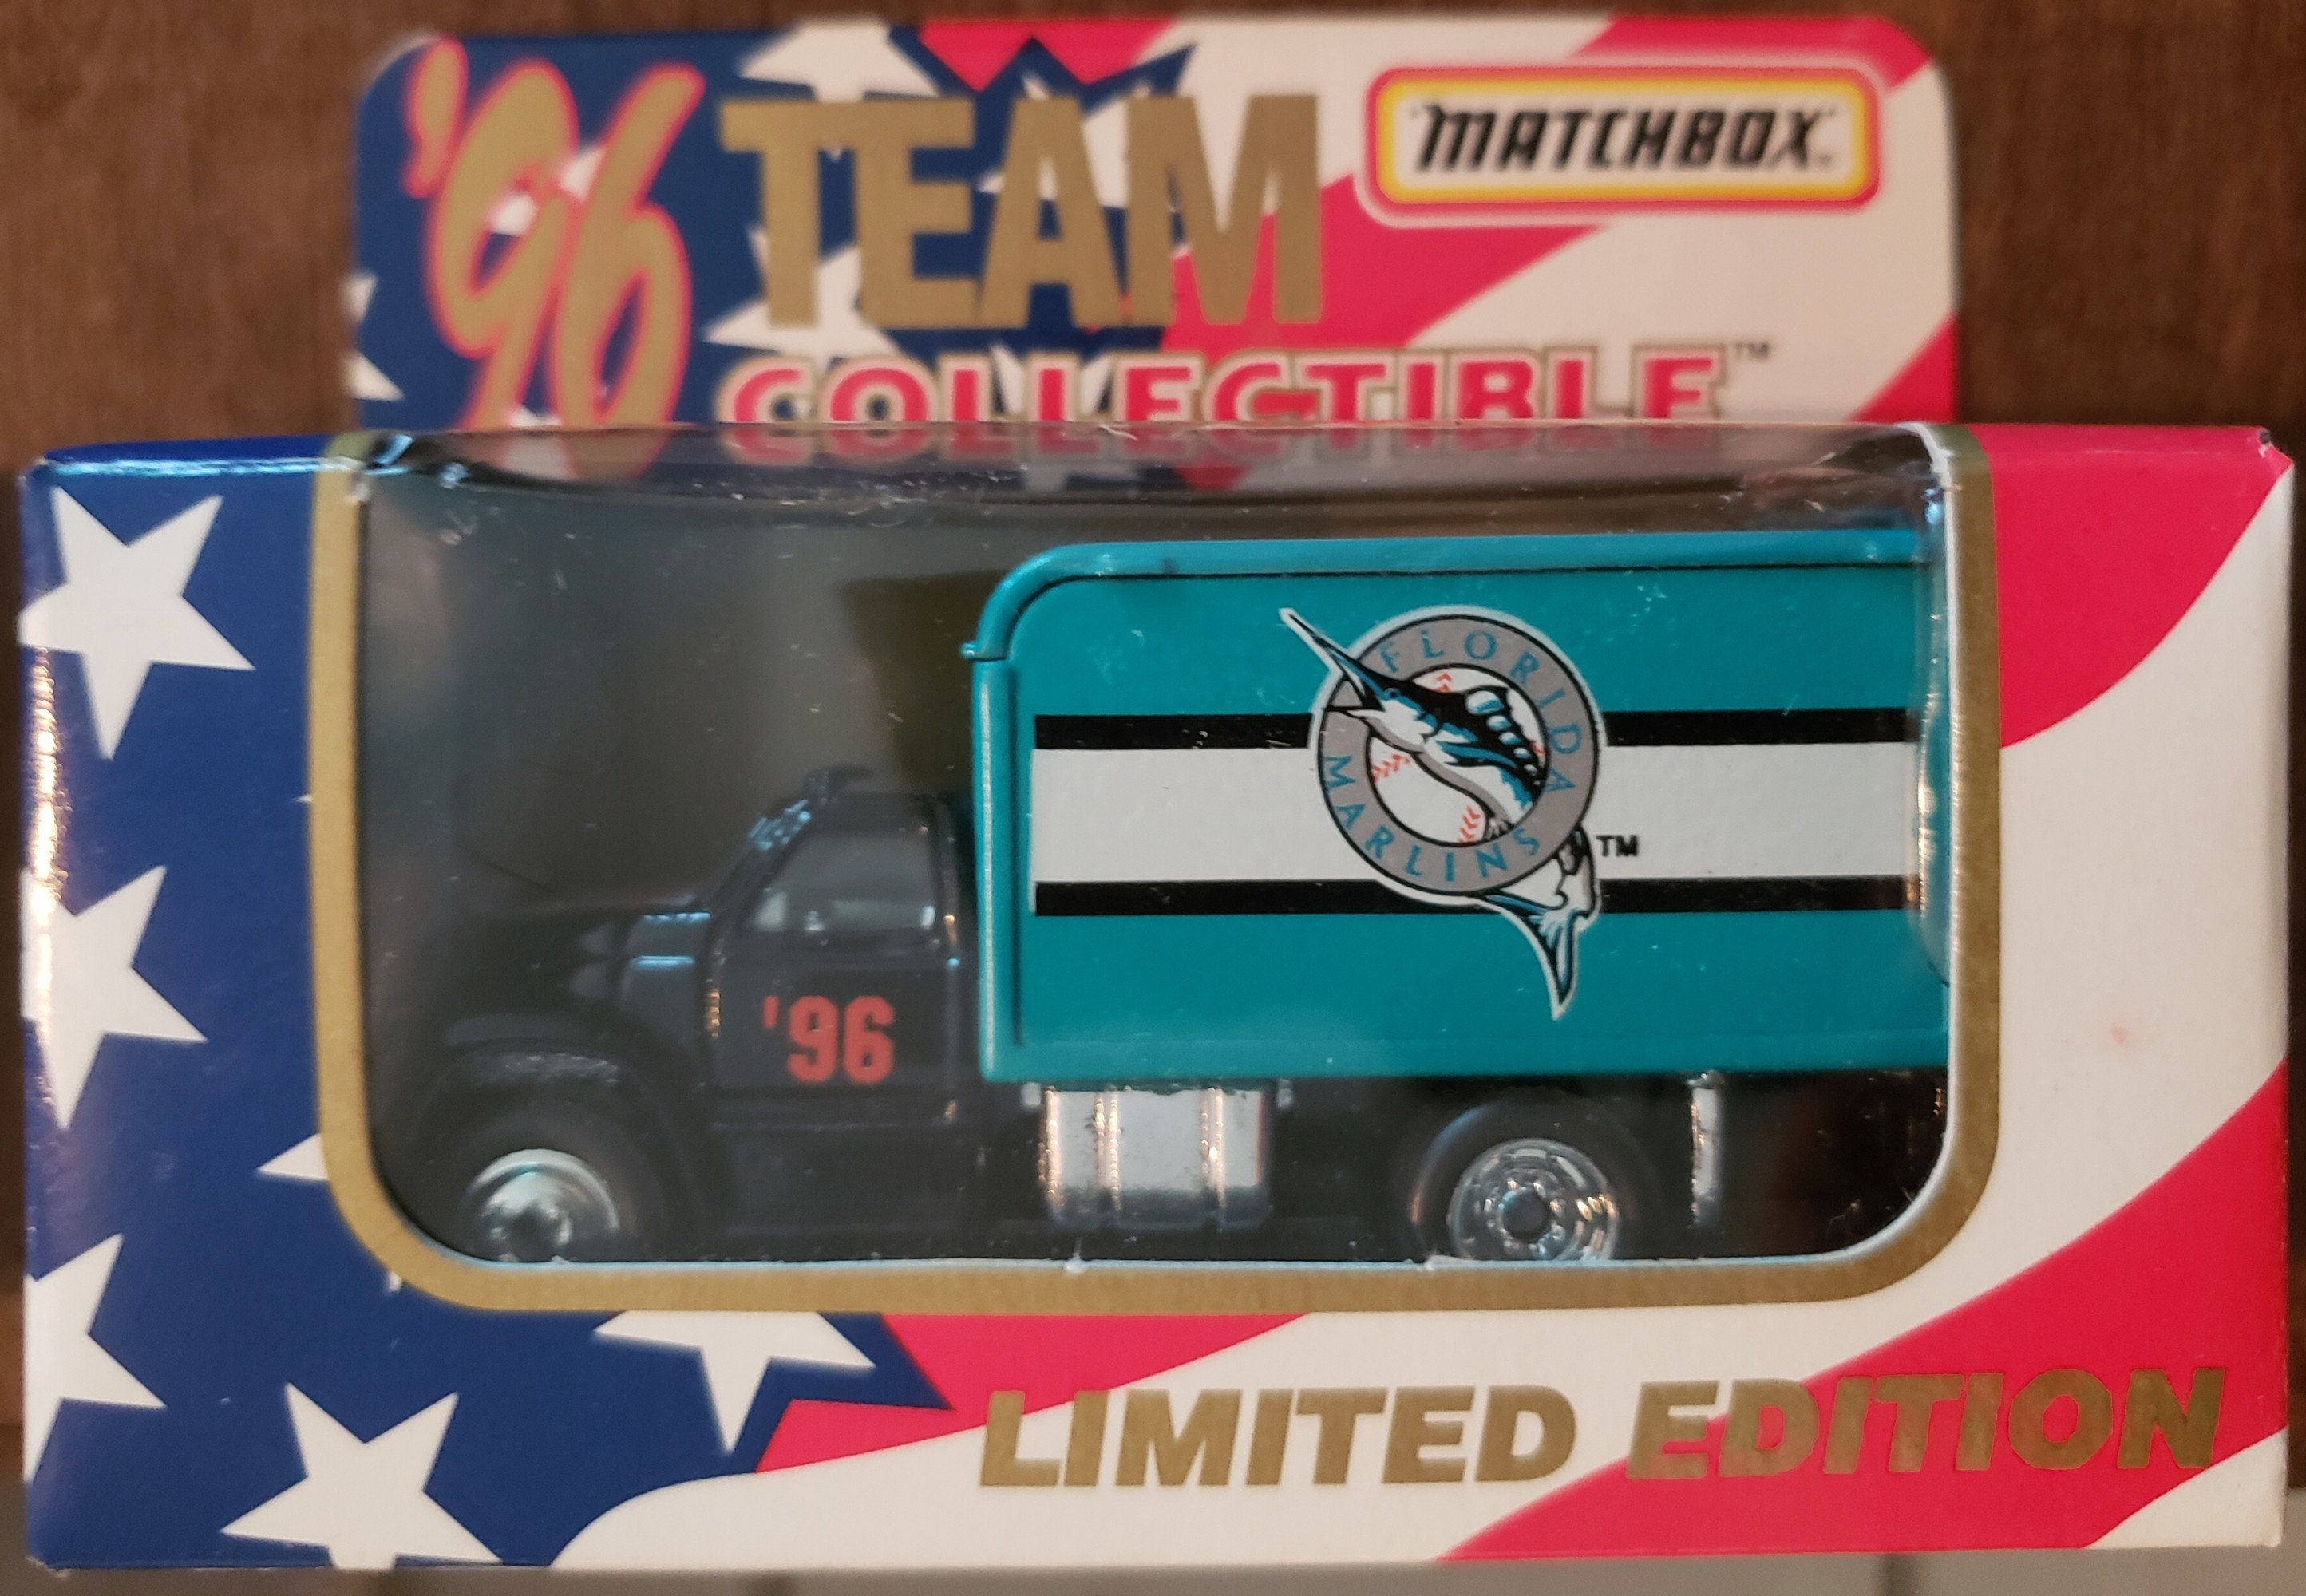 1999 Florida Marlins Hauler by White Rose Collectibles 